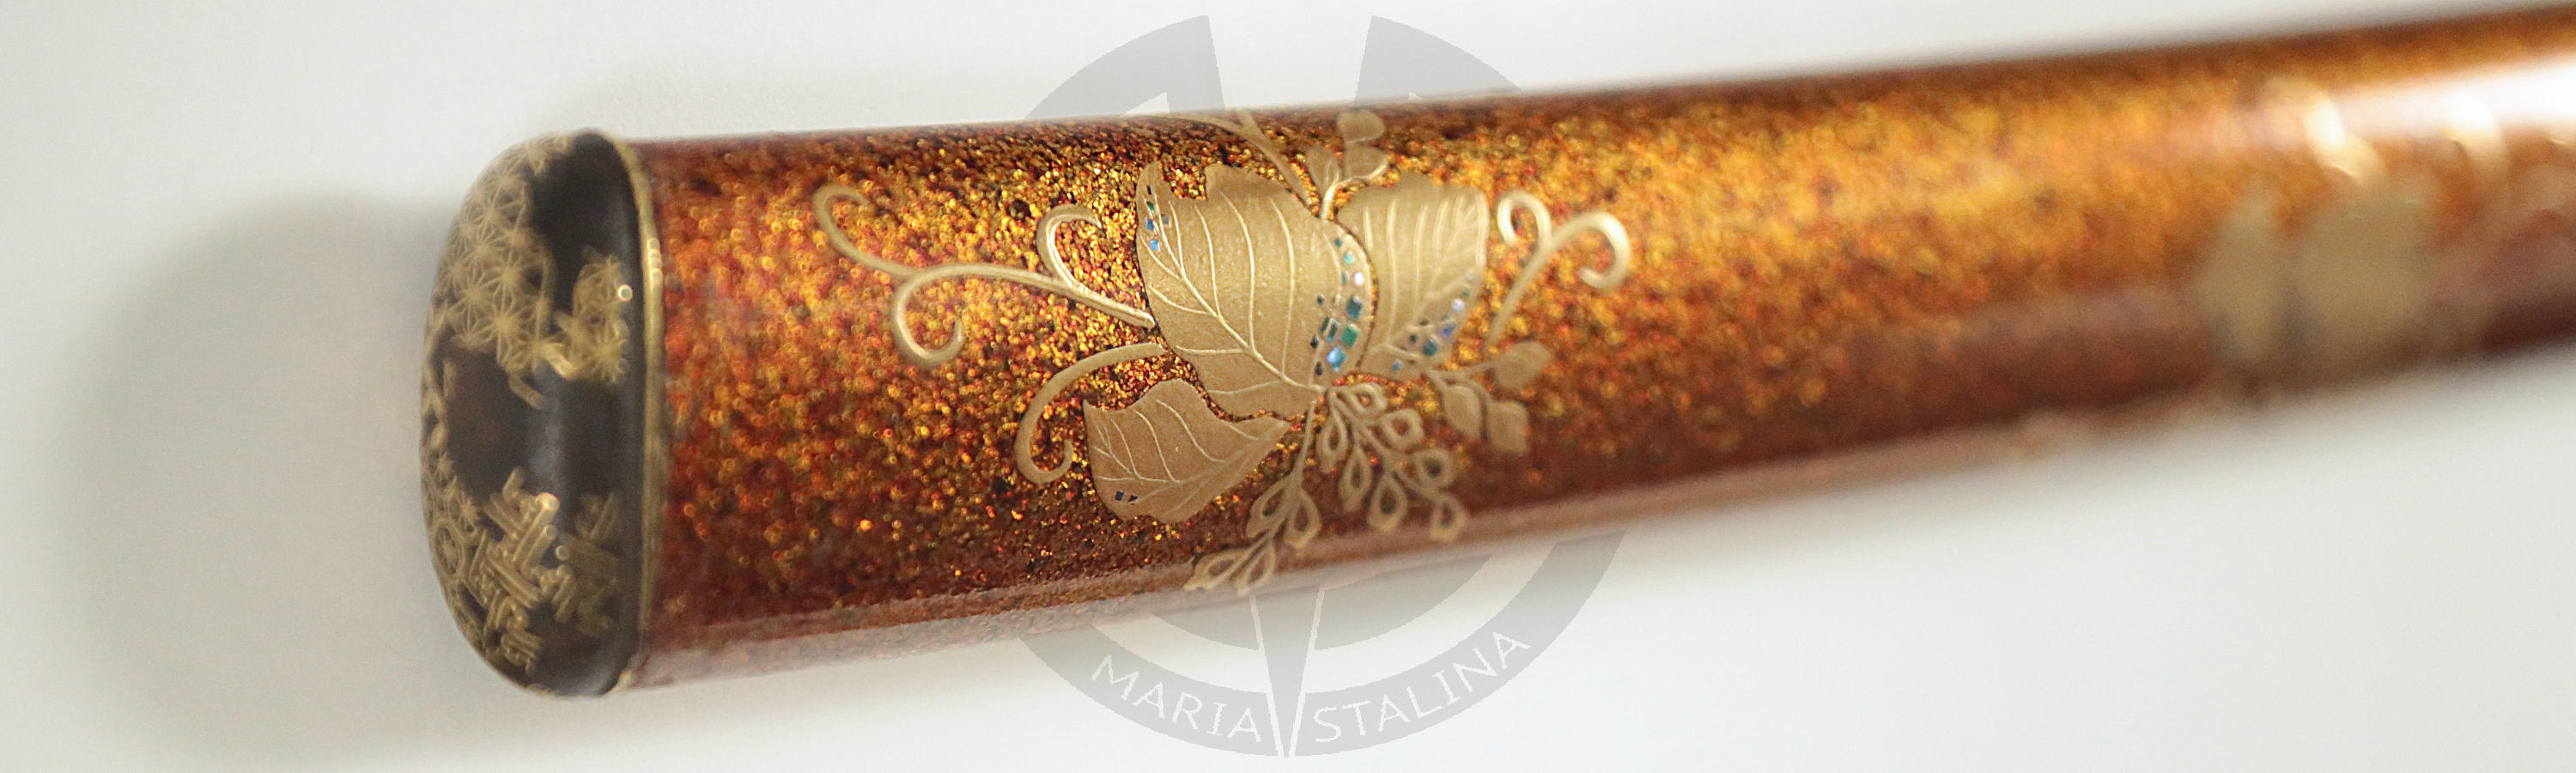 The scabbard is lacquered with golden crumbs